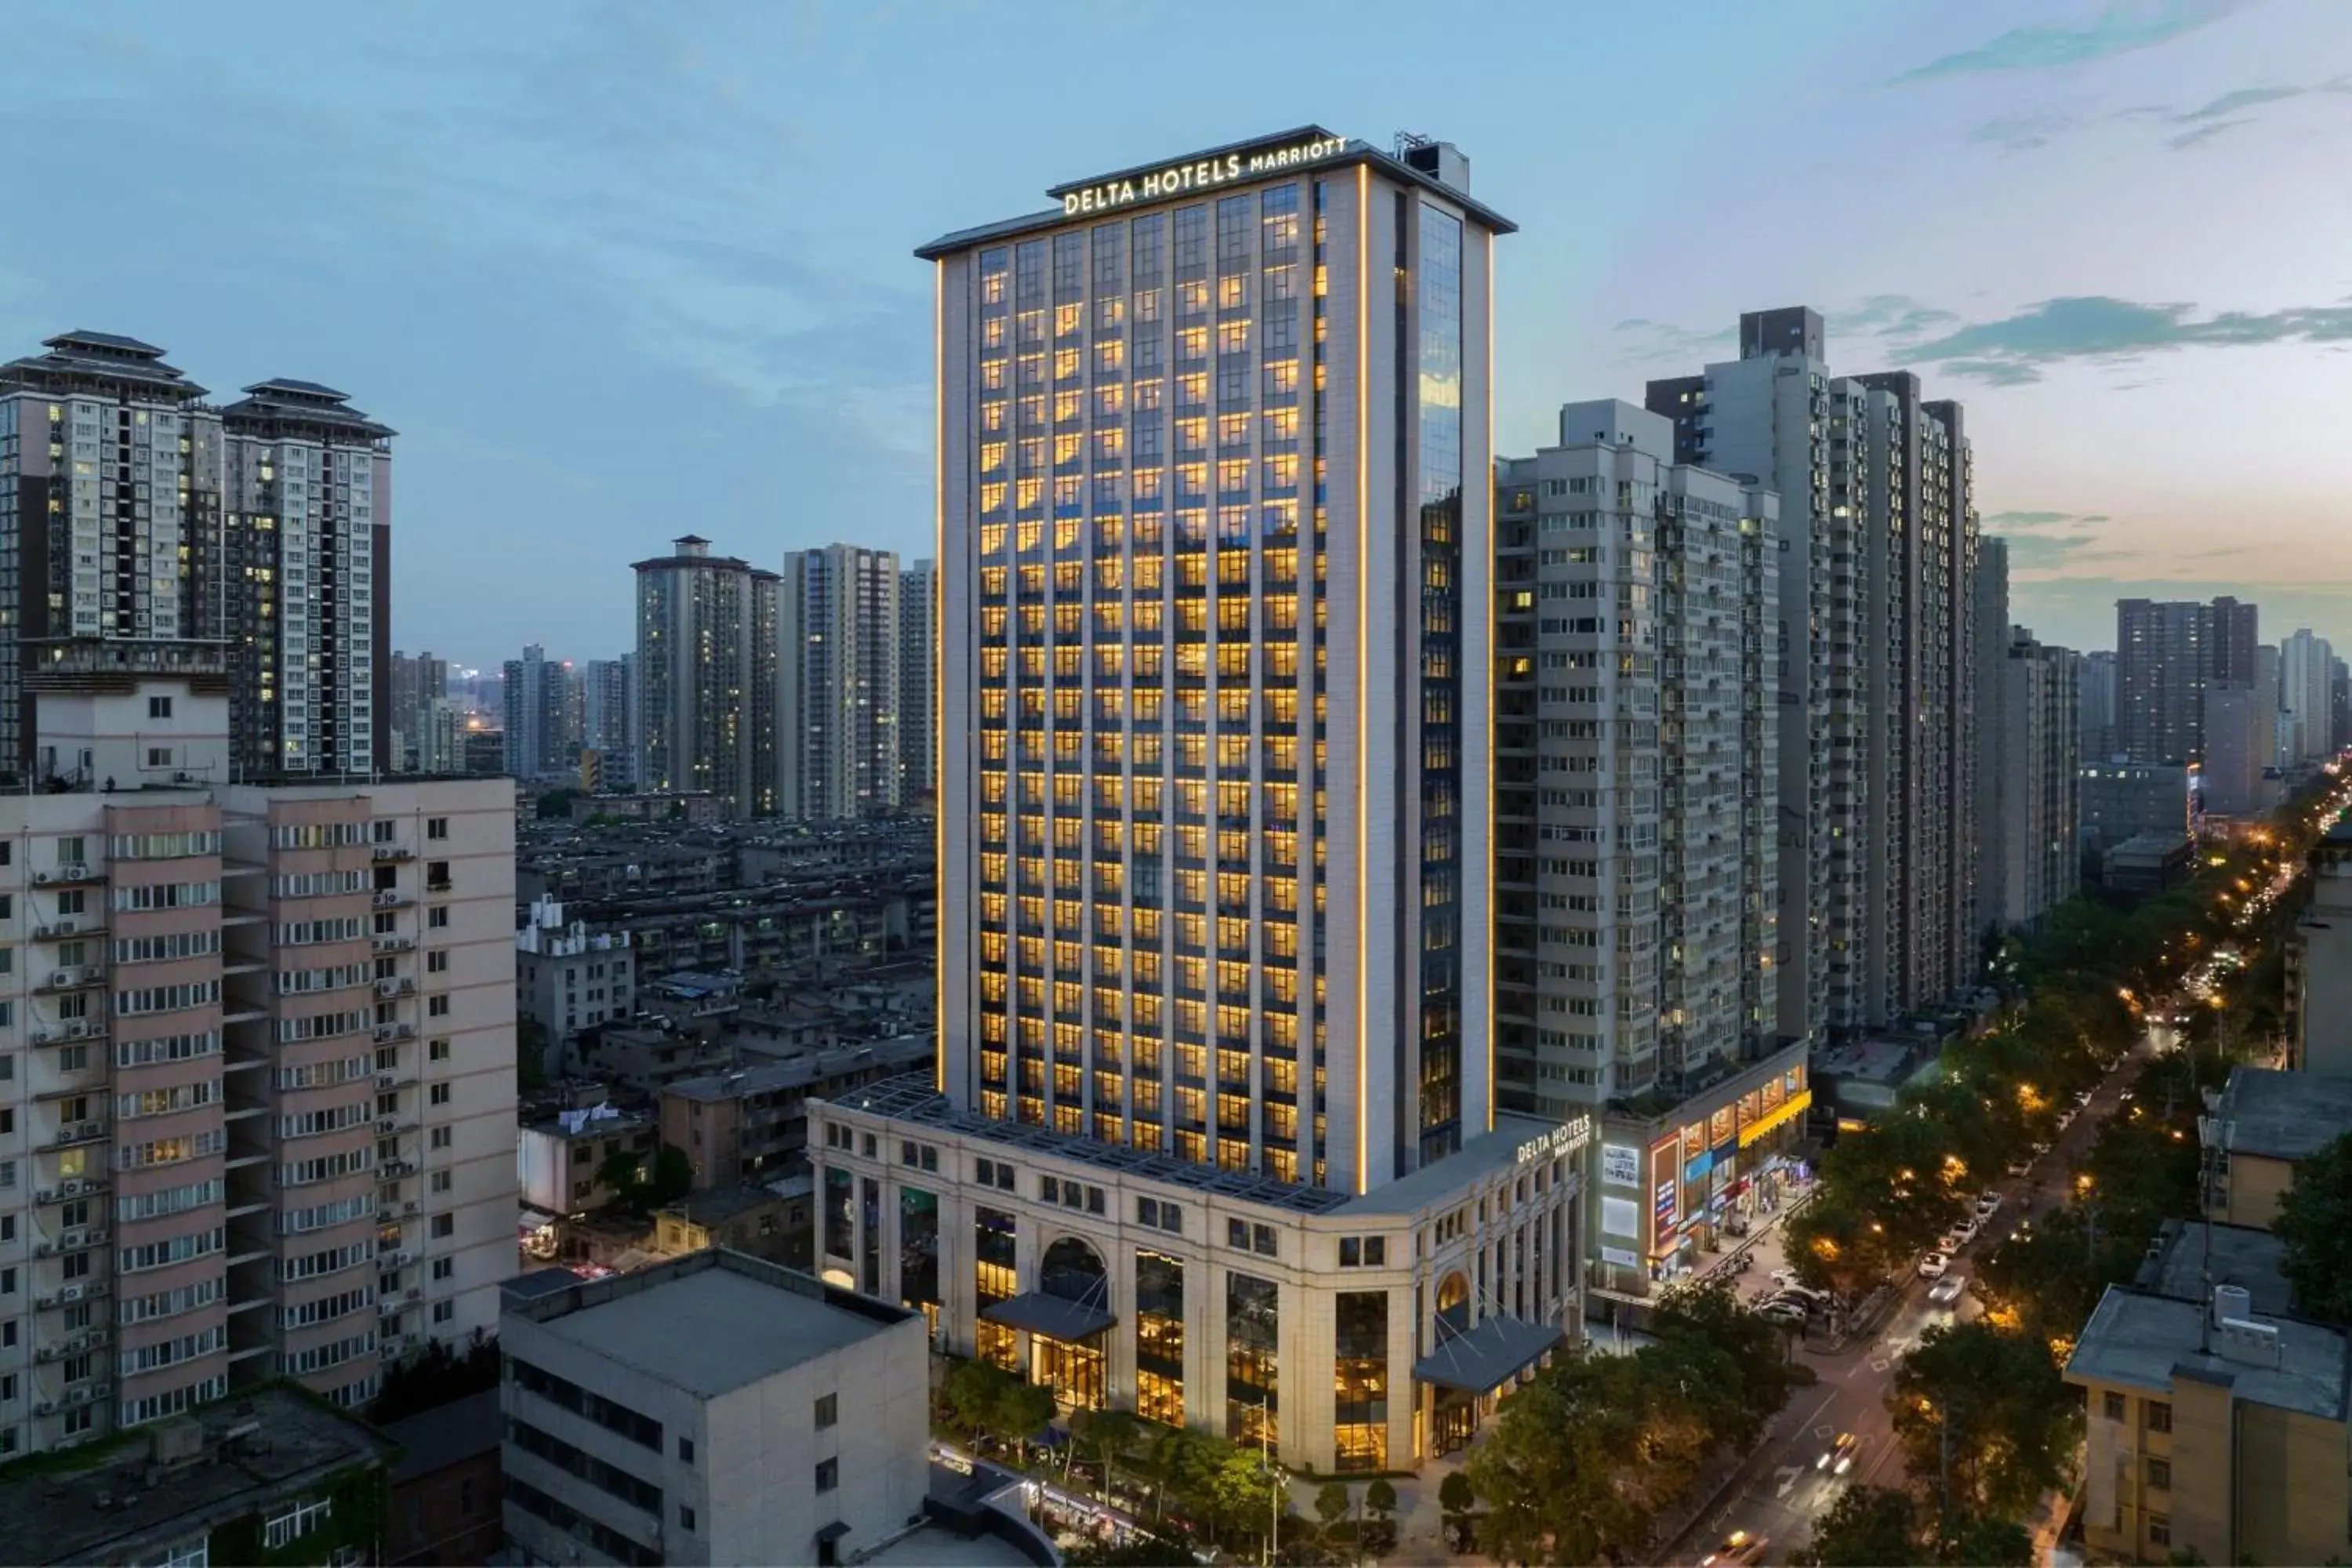 Property building in Delta Hotels by Marriott Xi'an